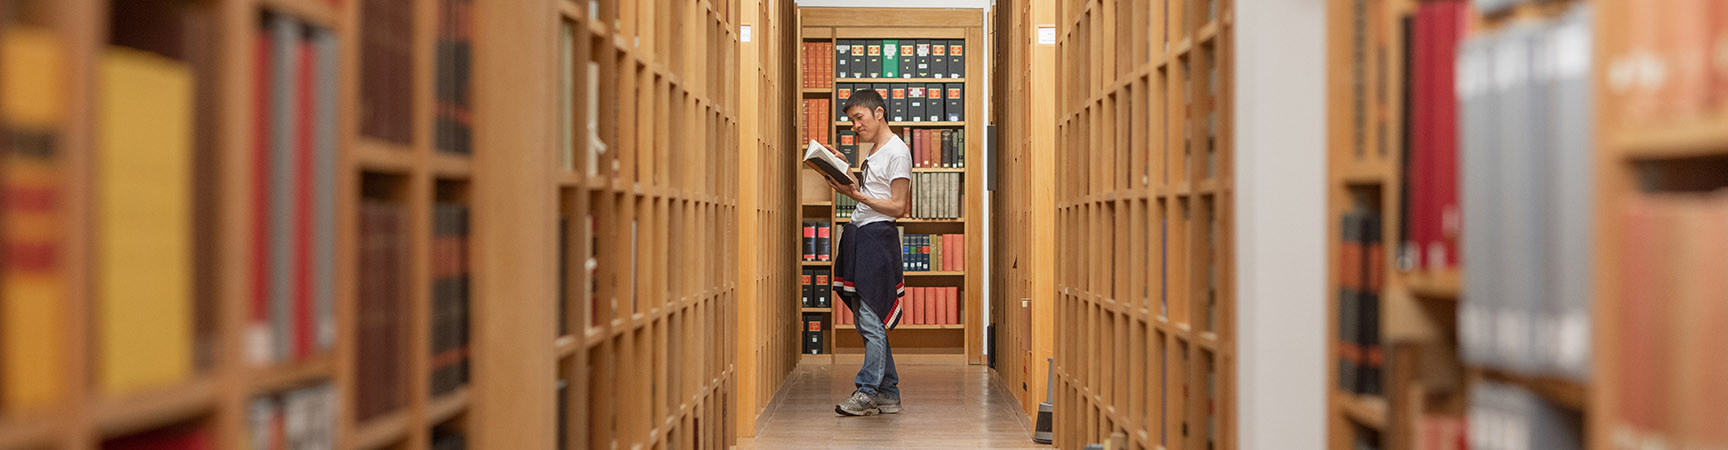 A long row of wooden bookshelves either side of a walkway, a student stands at the end reading